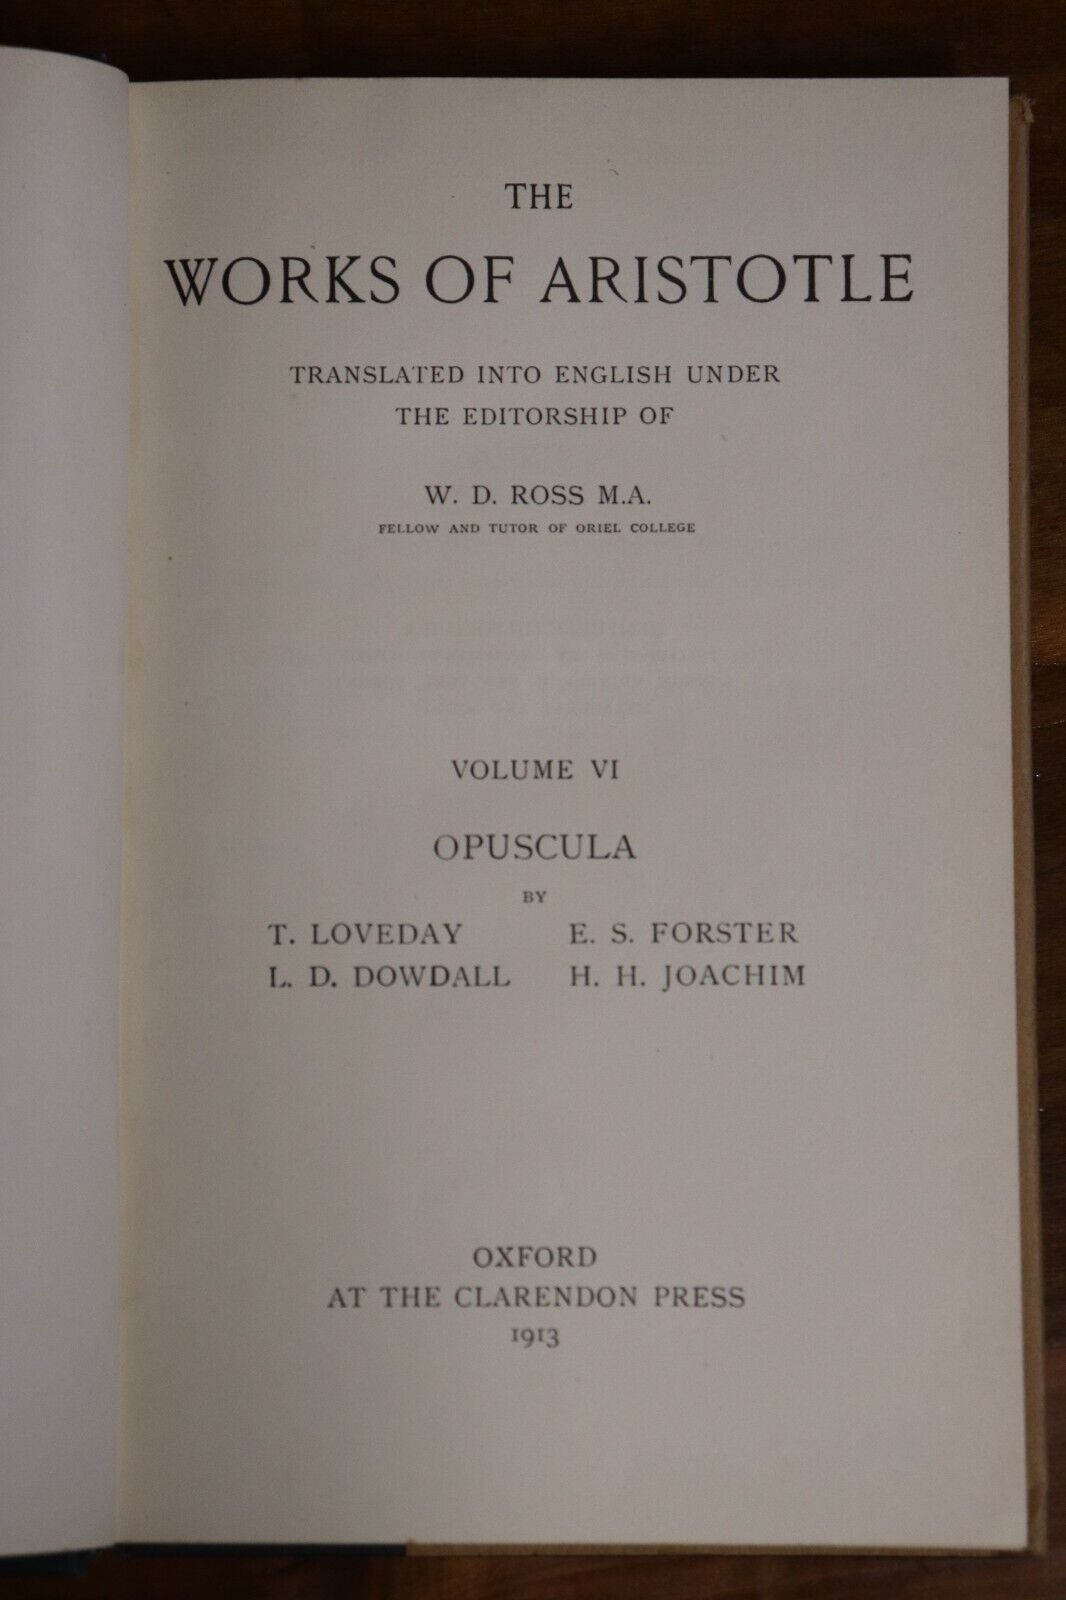 The Works Of Aristotle Vol. VI Opuscula - 1913 - 1st Ed. Antique Philosophy Book